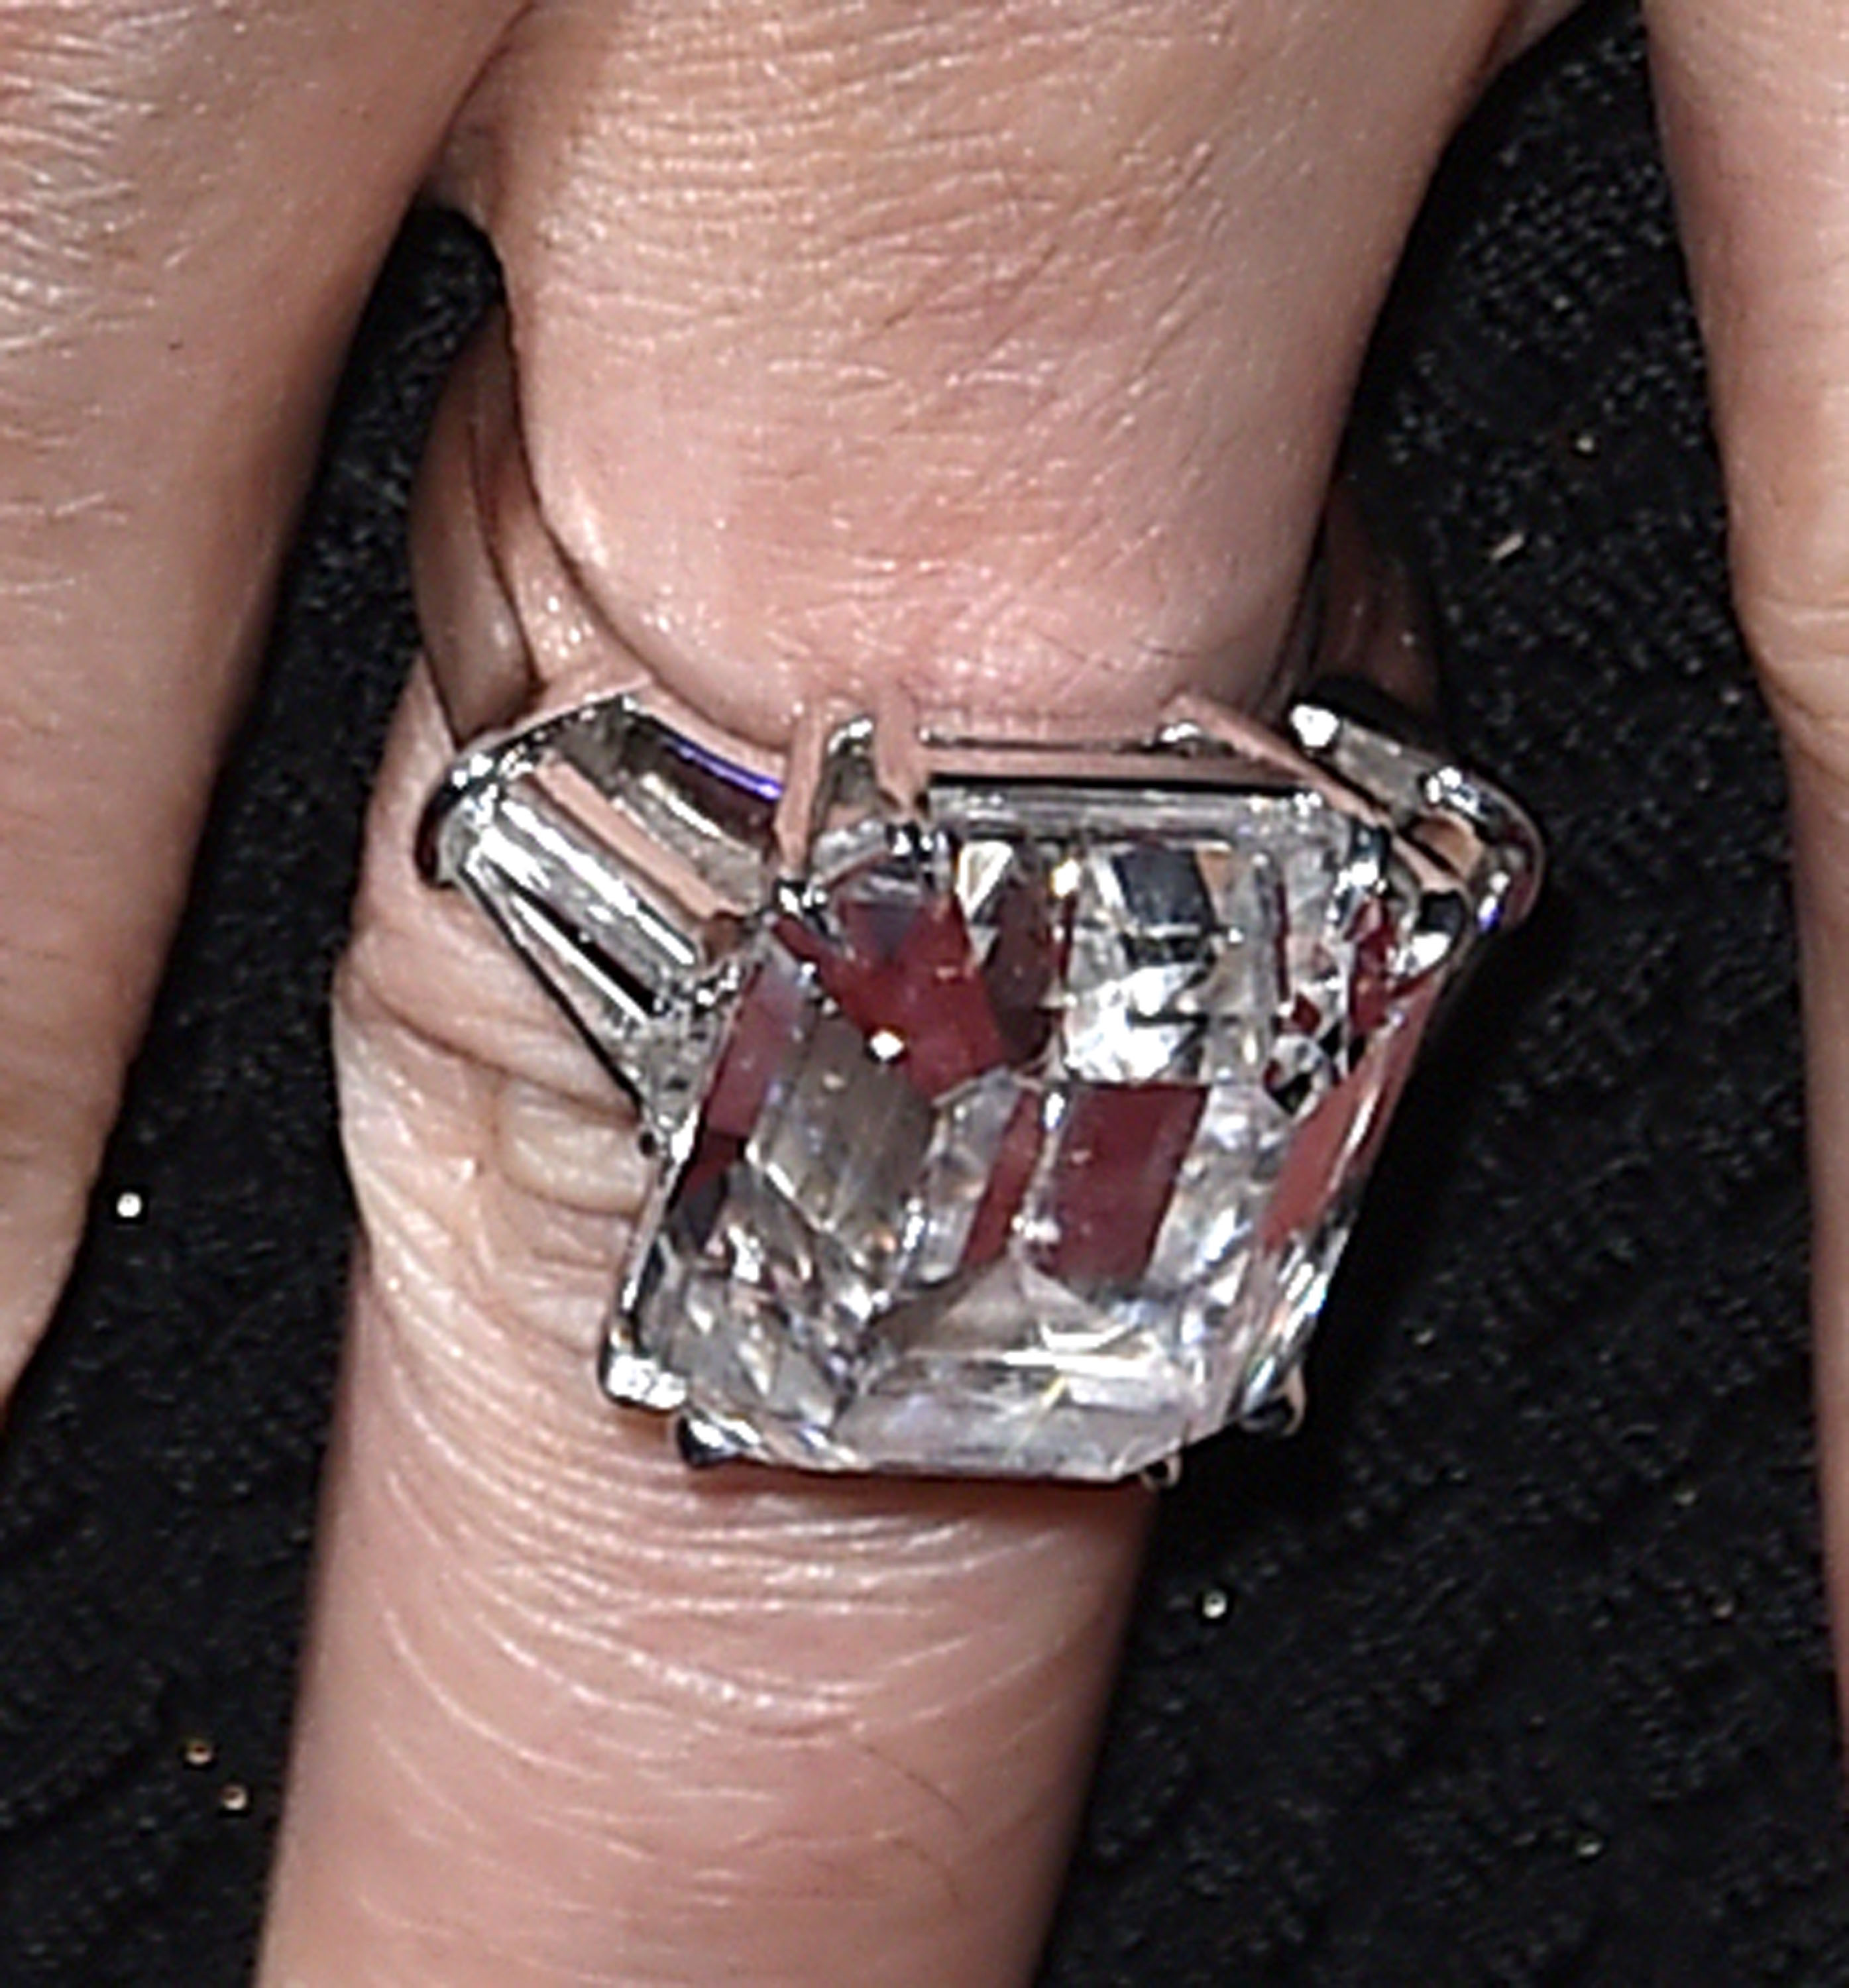 The 18 Most Jaw-Dropping US Celebrity Engagement Rings | The Antique  Jewellery Company